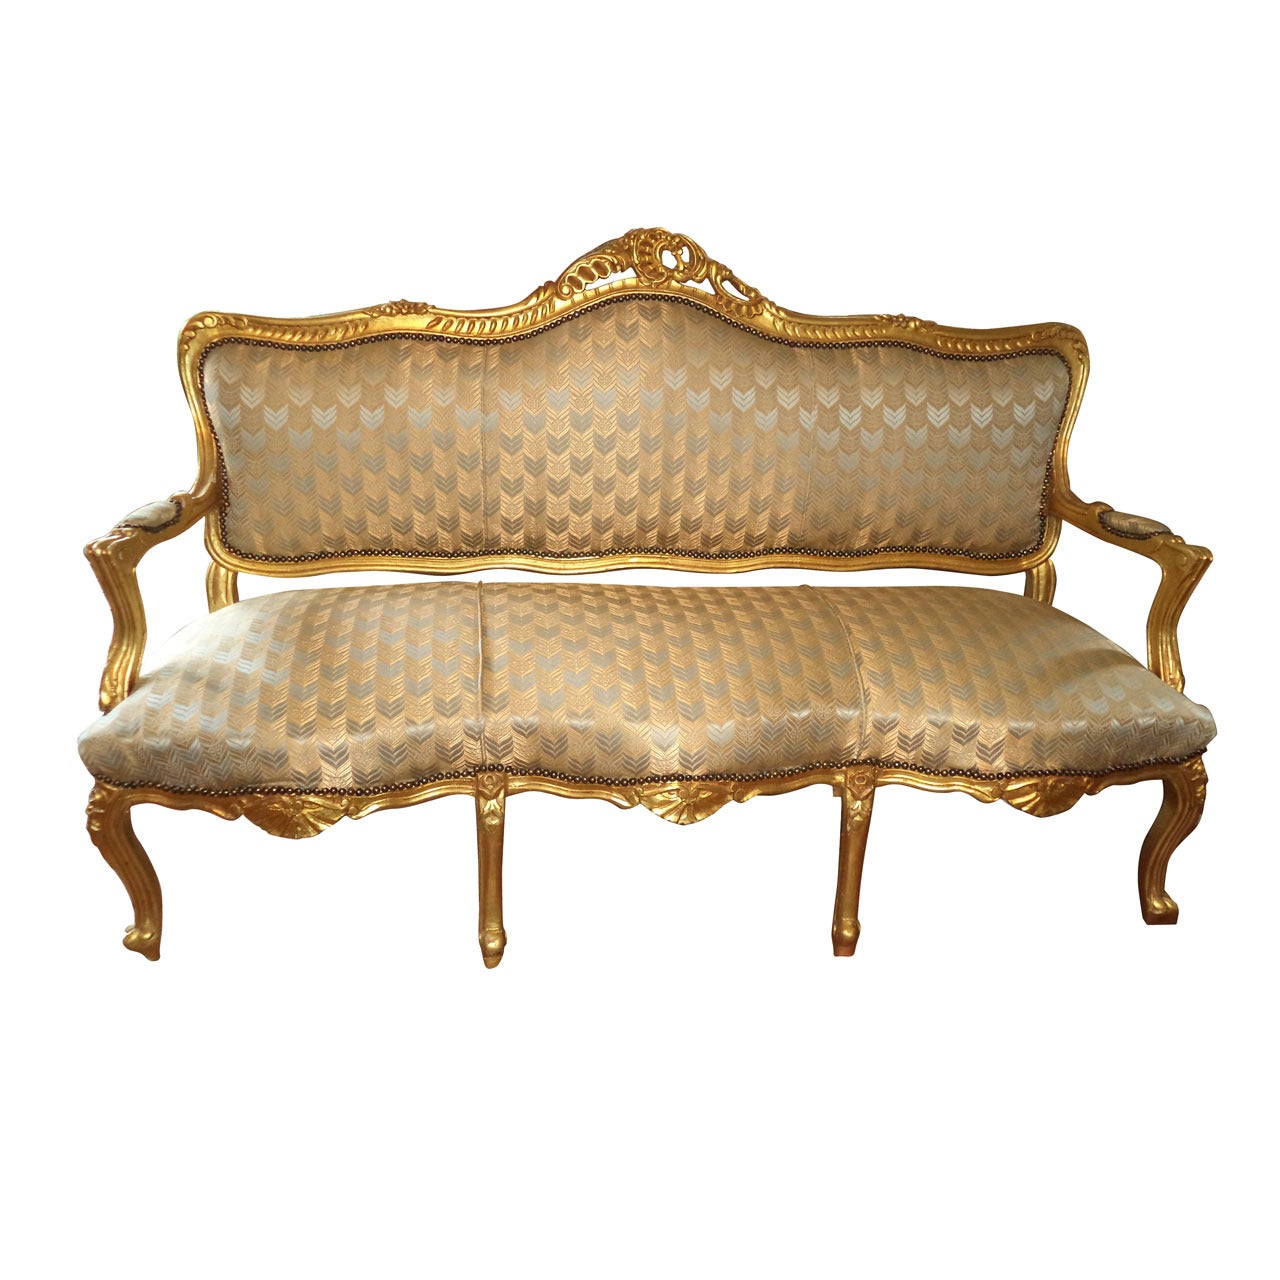 French Gilt Sofa in the Style of Louis XVI